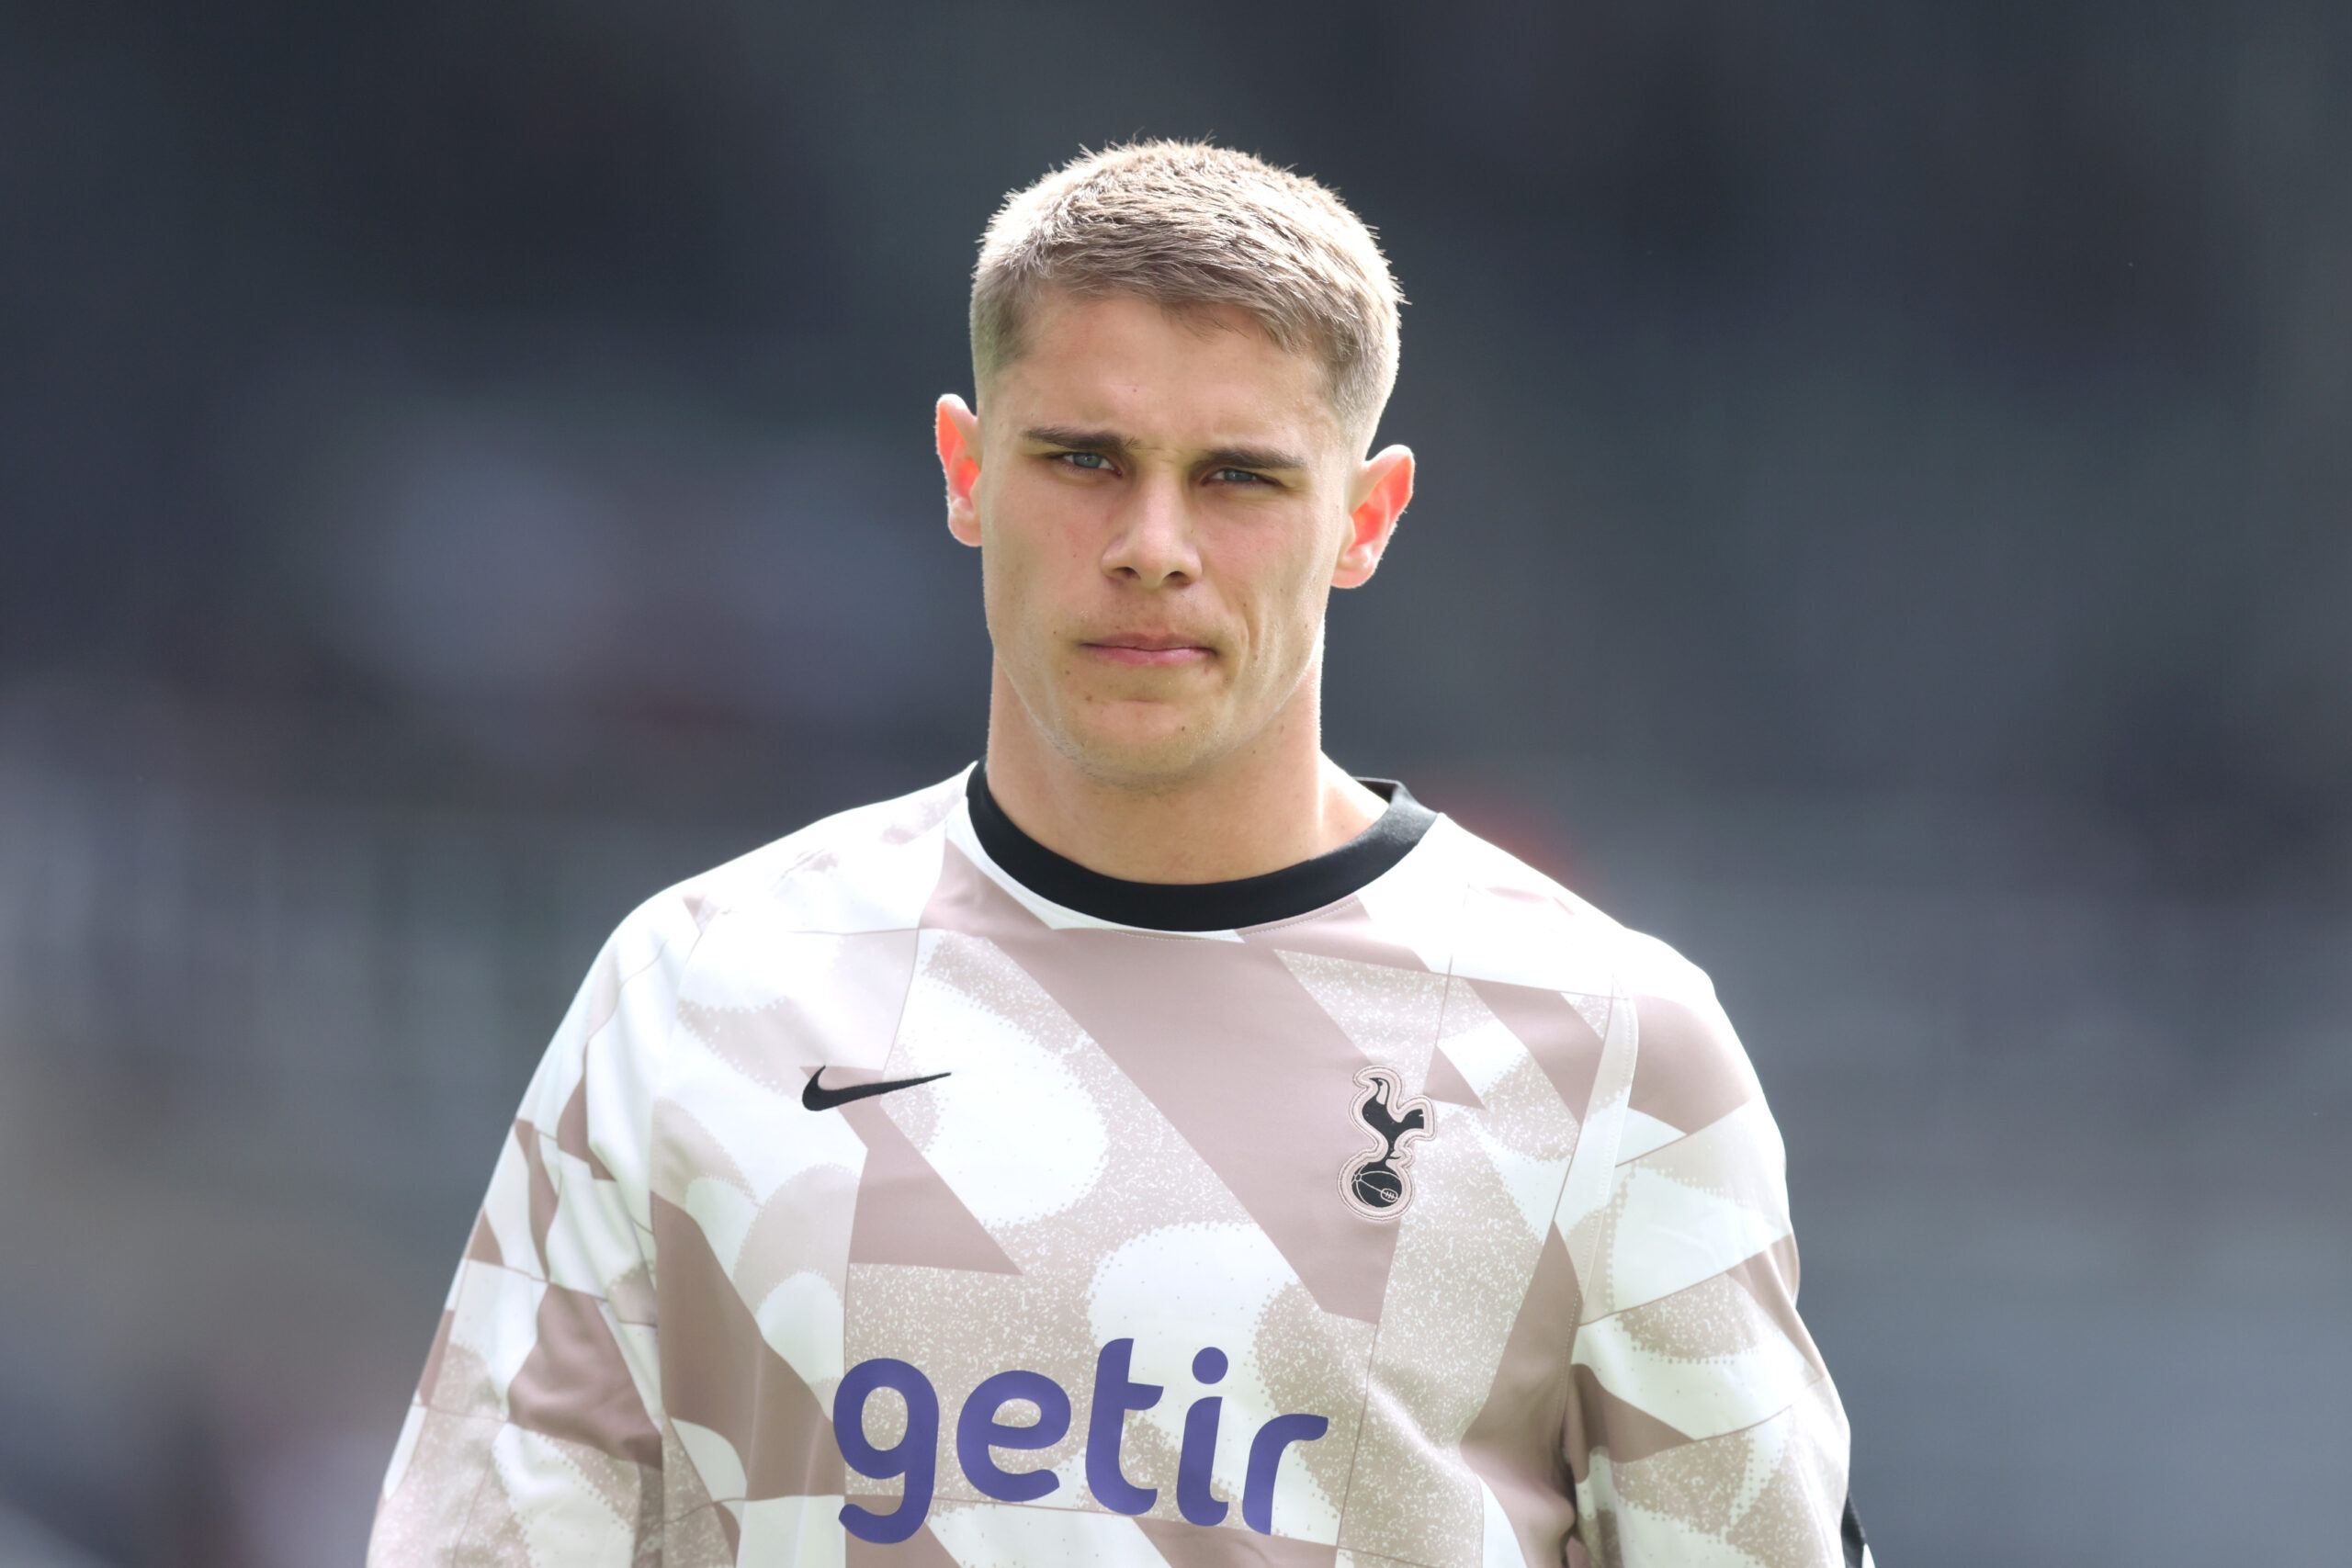 Can Micky van de Ven reach his ceiling? Examining a breakout year at Spurs